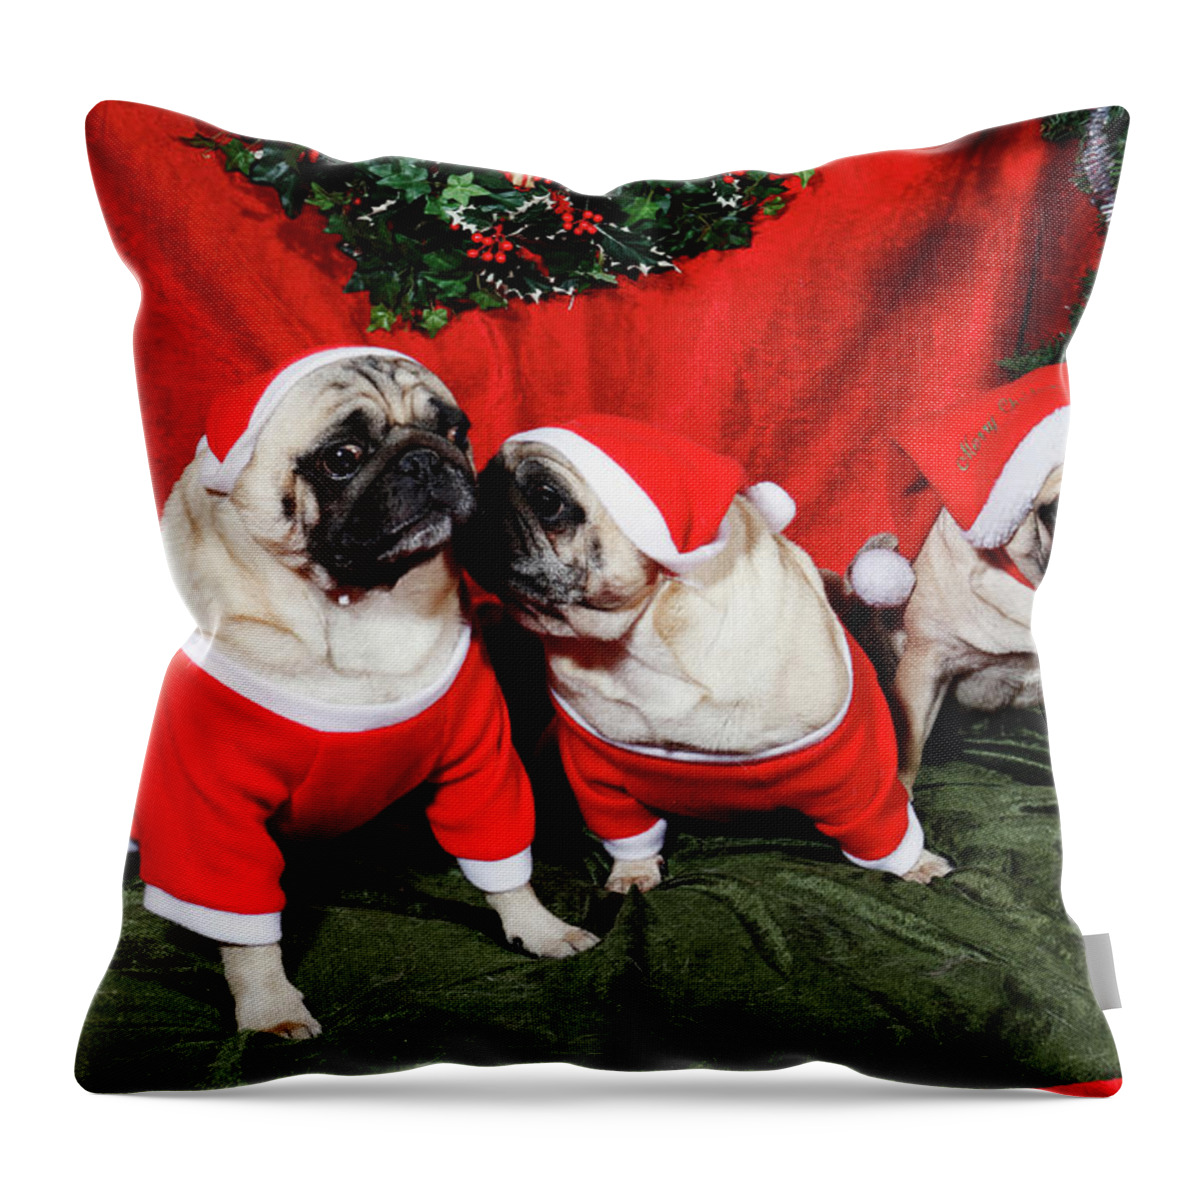 Pug Throw Pillow featuring the photograph Pugs Dressed As Father-christmas by Christian Lagereek